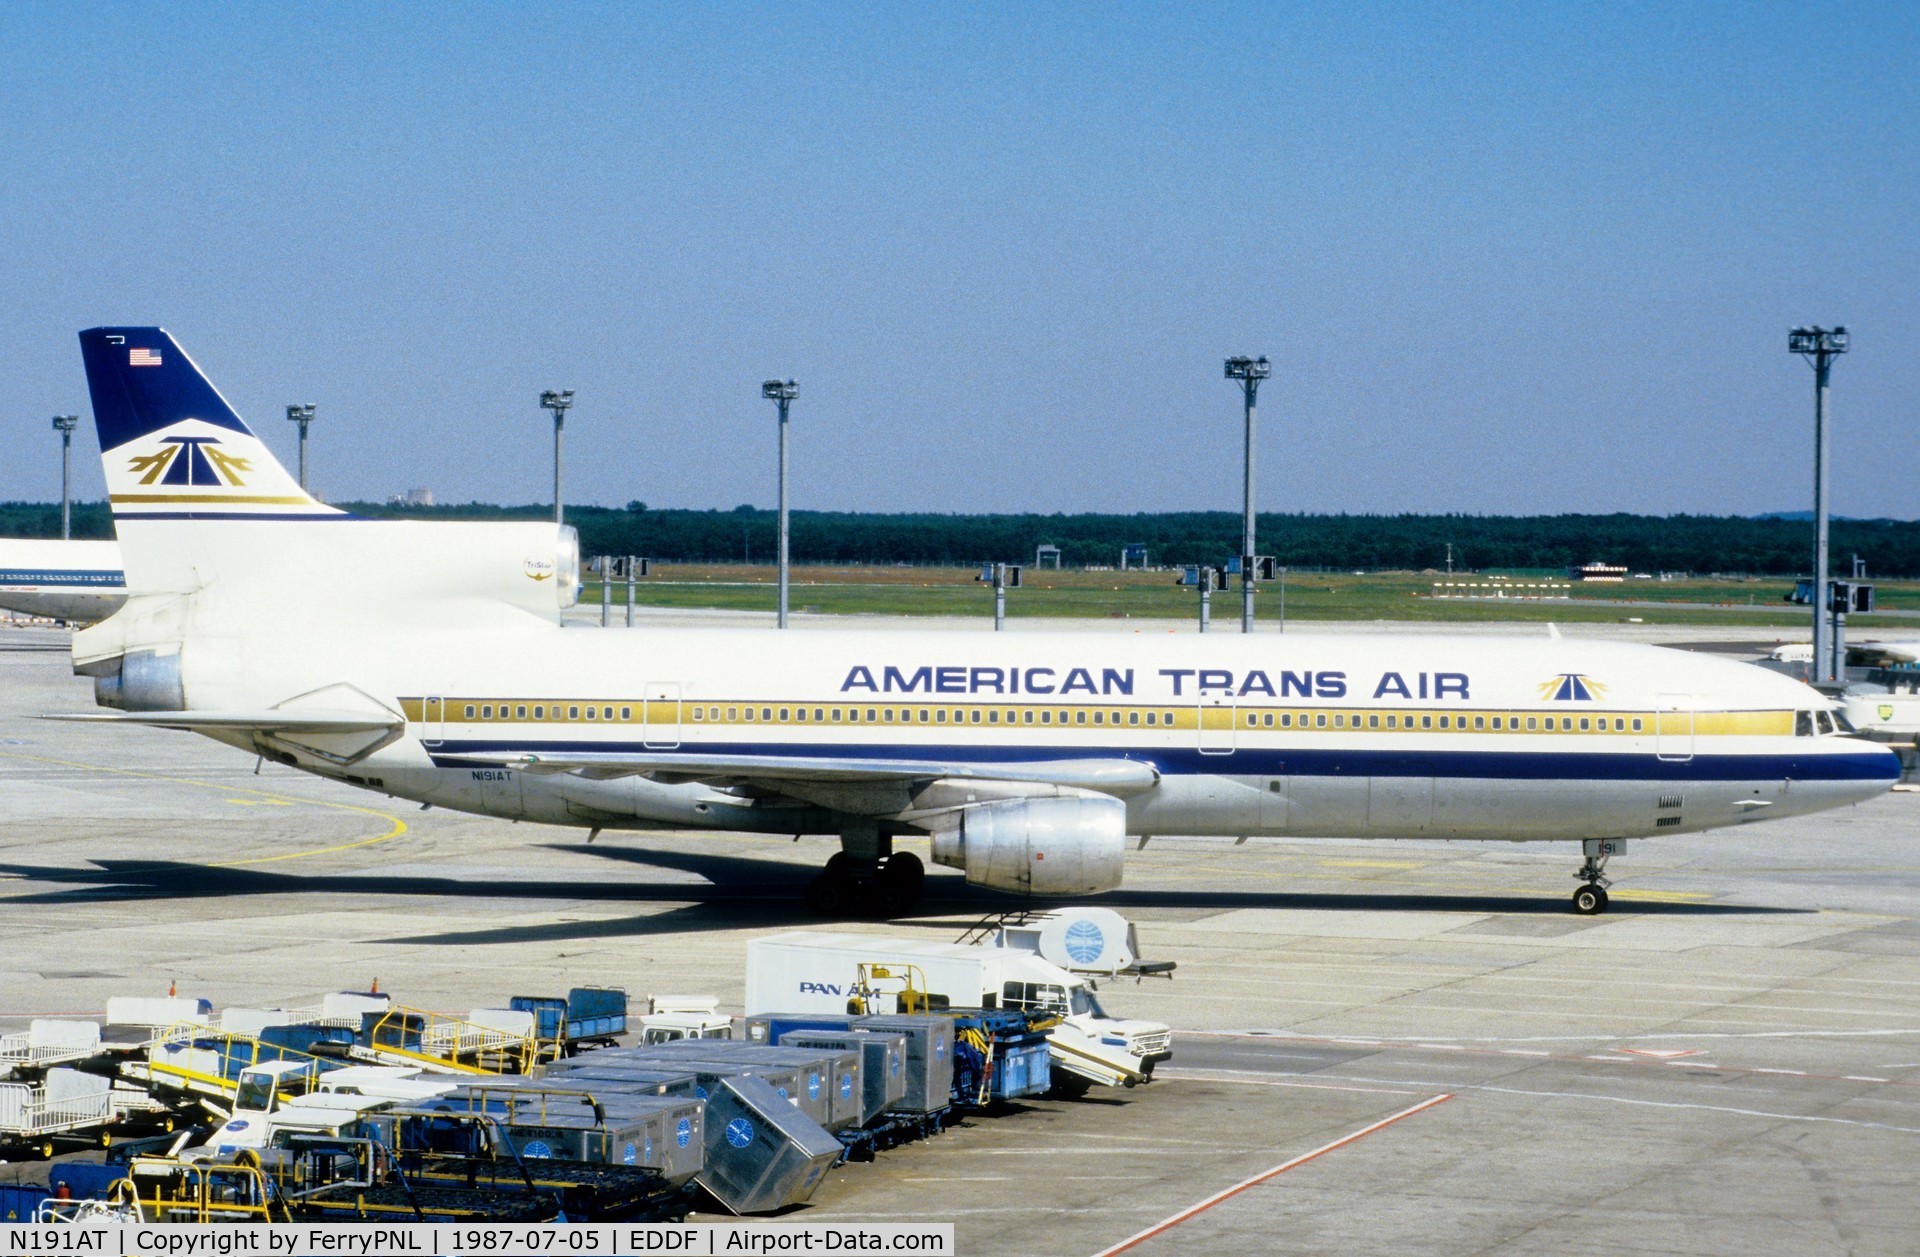 N191AT, 1974 Lockheed L-1011-385-1 TriStar 50 C/N 193C-1084, ATA L1011 taxying for departure